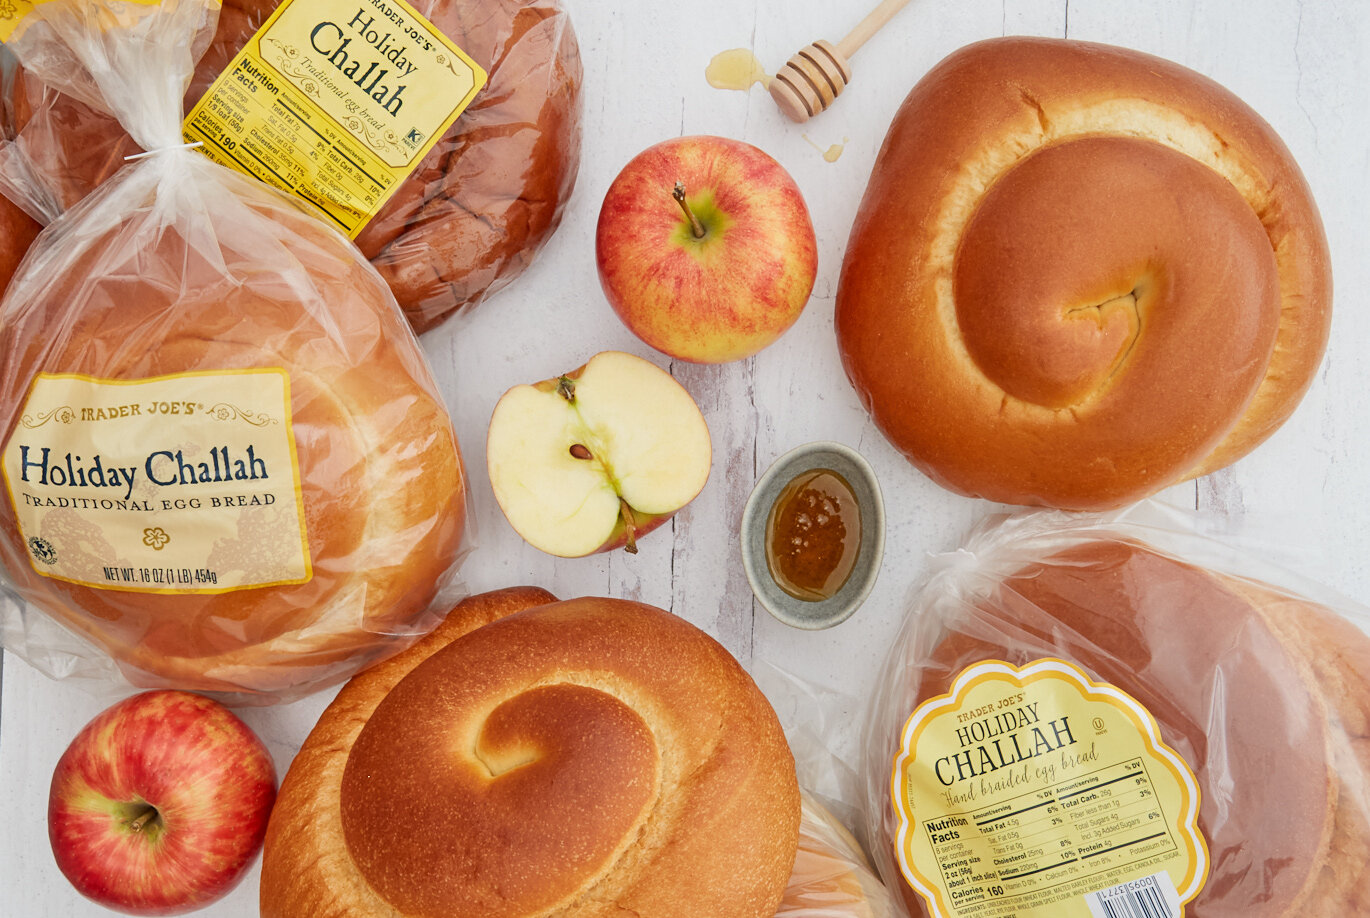 4 bags of Trader Joe's Holiday Round Challah offerings from regional suppliers; more whole challah out of bag and on surface with a dish of honey; whole apples and sliced apple half